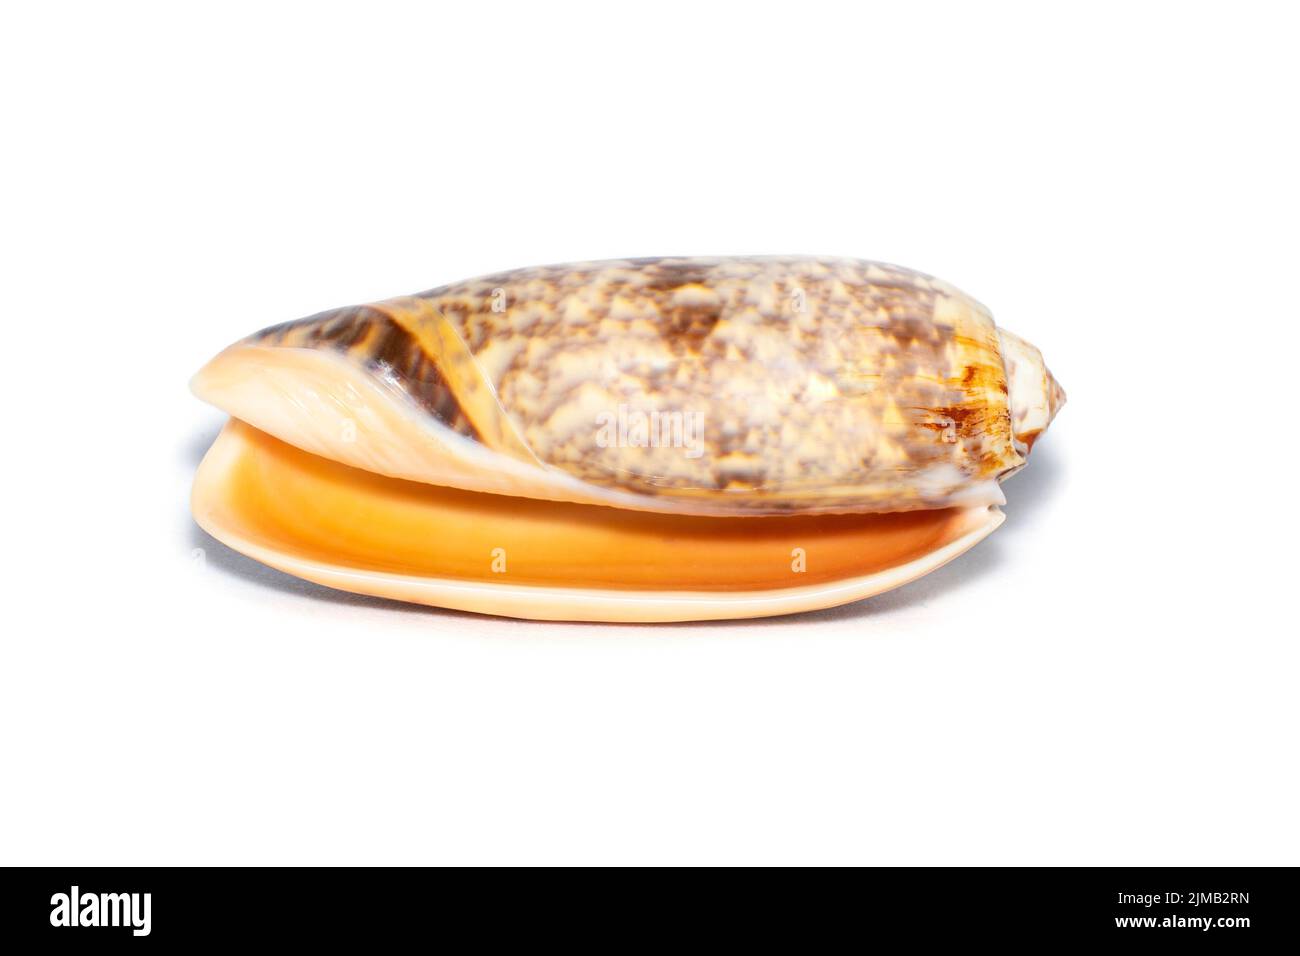 Image of cone snail shells or Cone shell on a white background. Undersea Animals. Sea shells. Stock Photo